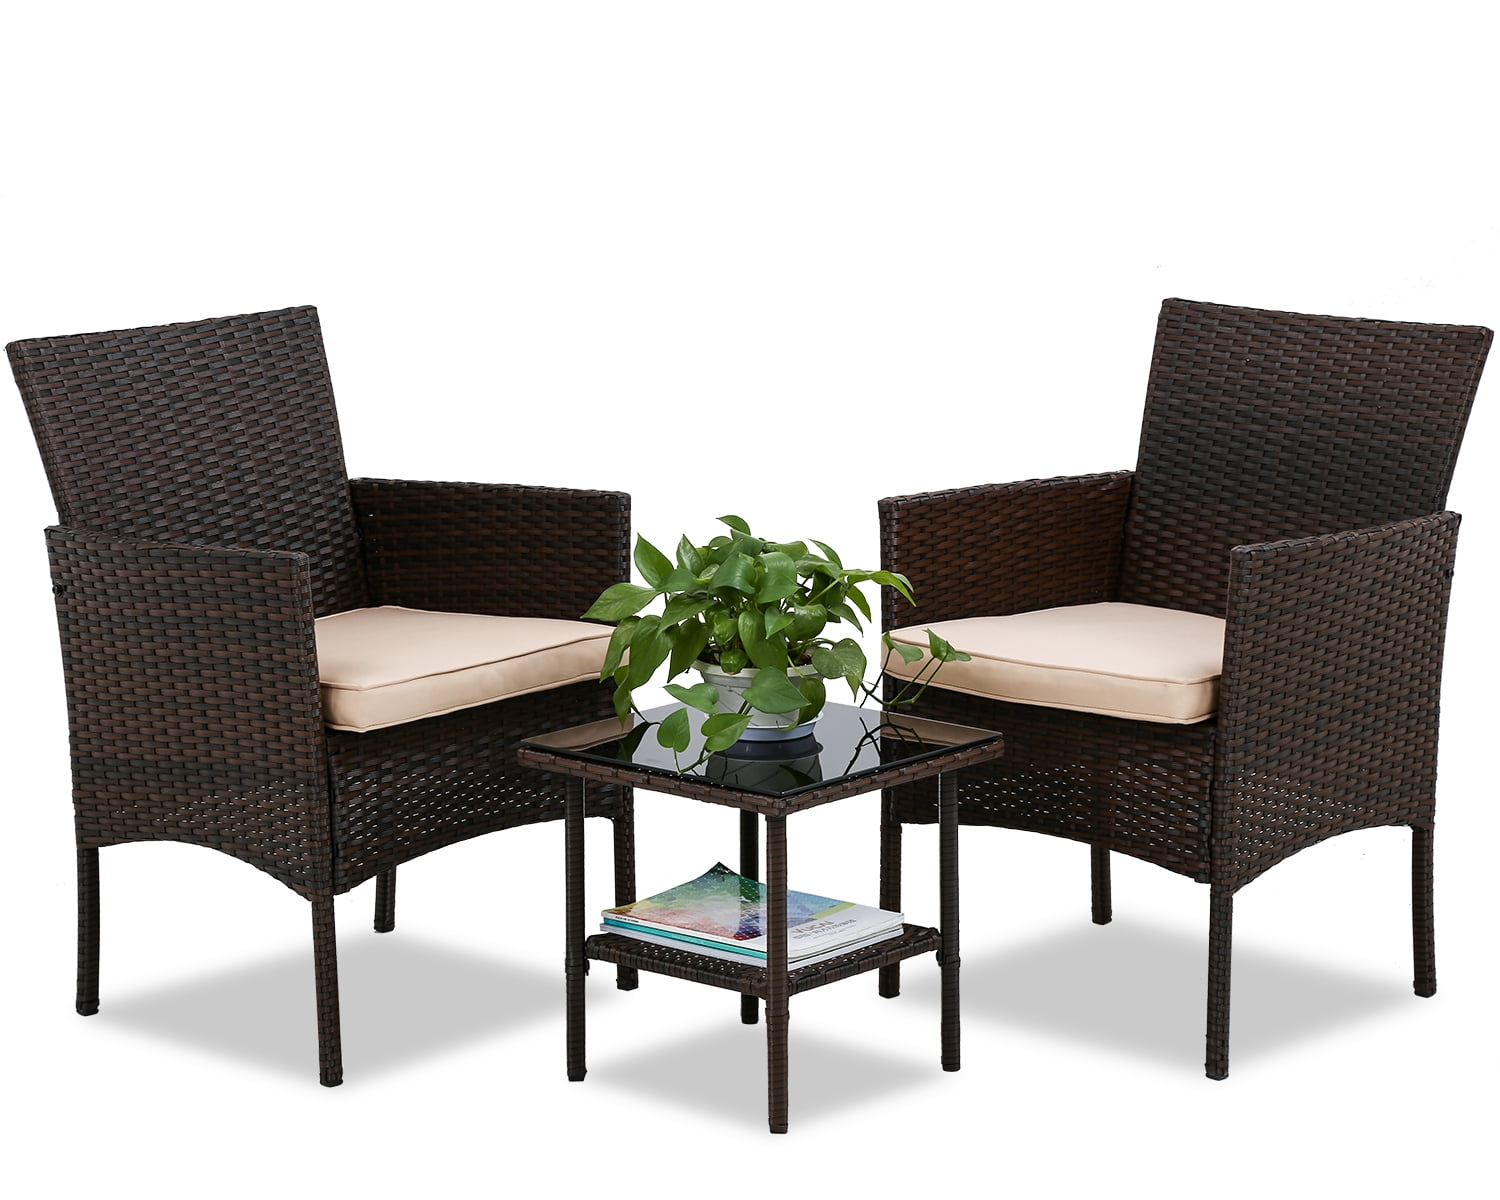 Fdw Outdoor Patio Furniture Sets 3, Outdoor Porch Furniture Sets